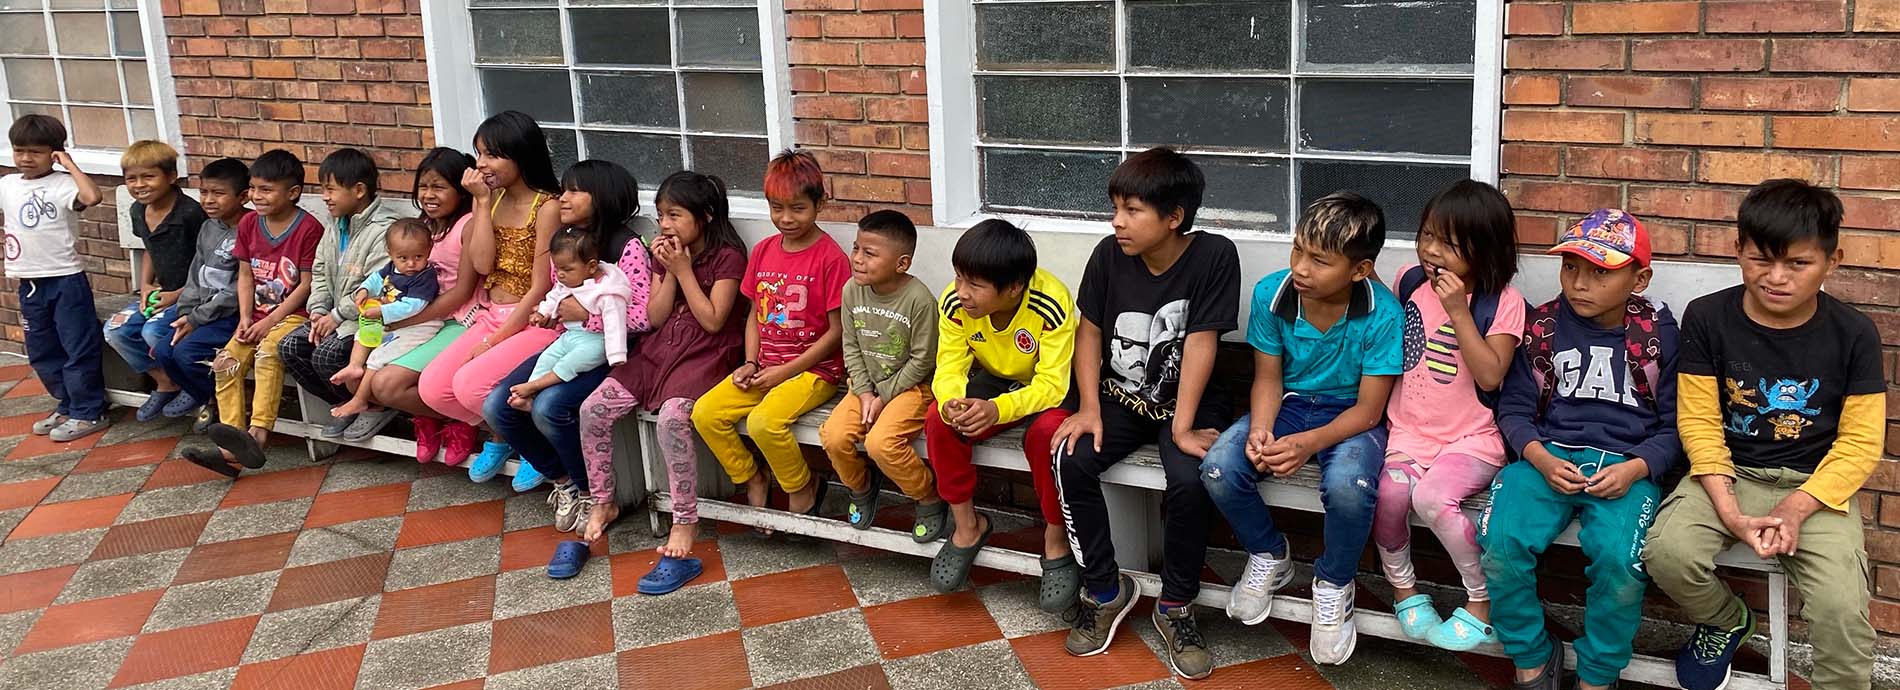 Displaced Families in Colombia Welcomed Into the Community